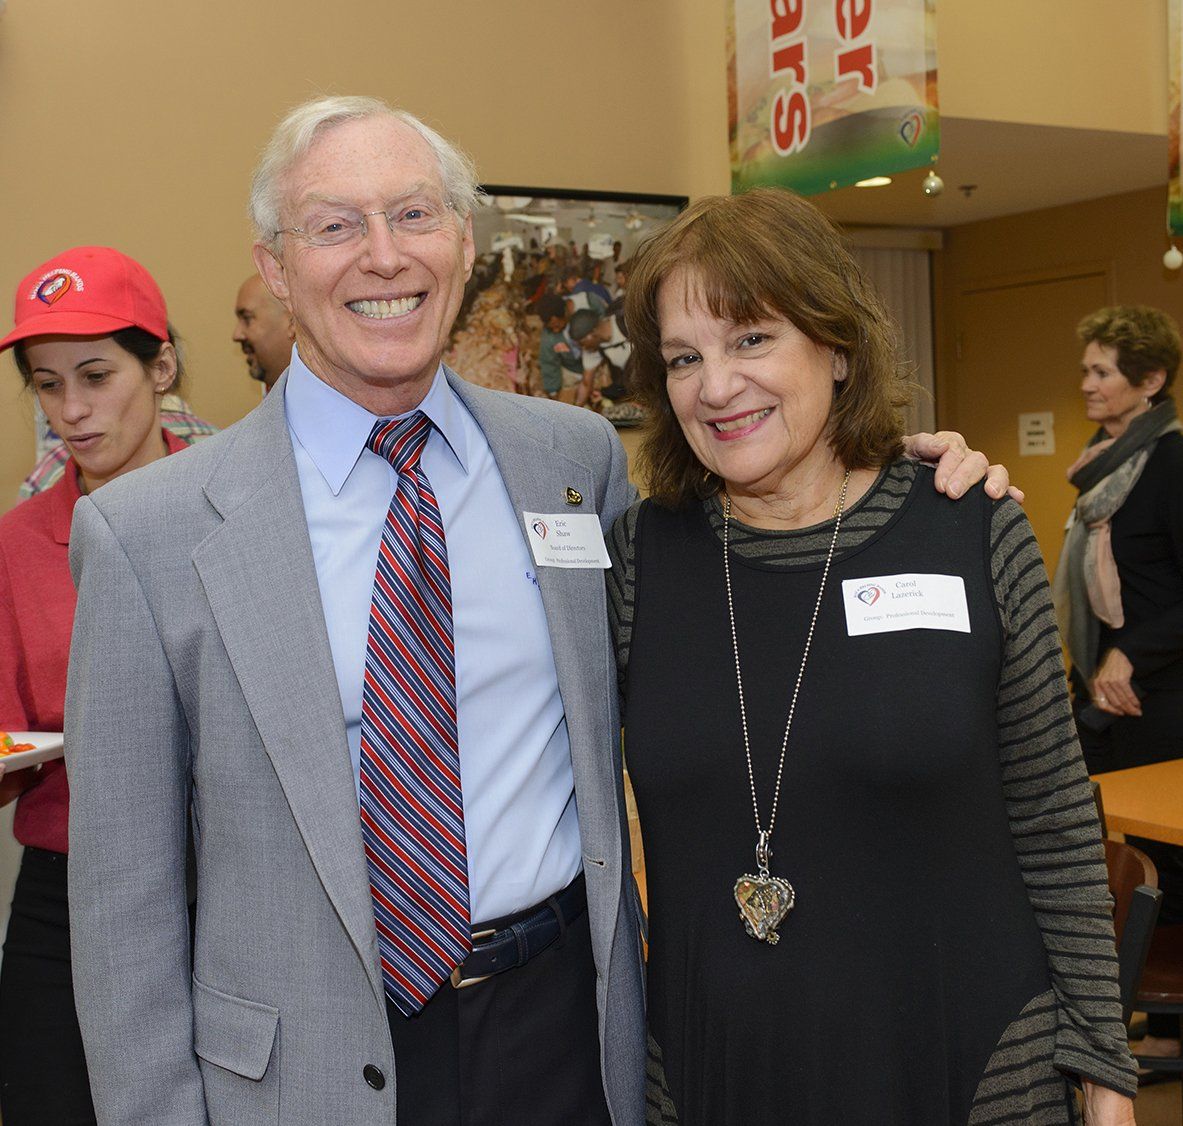 Dr. Eric Shaw at BHH with Carol, daughter of Founding Board Member Mel Lazerick.